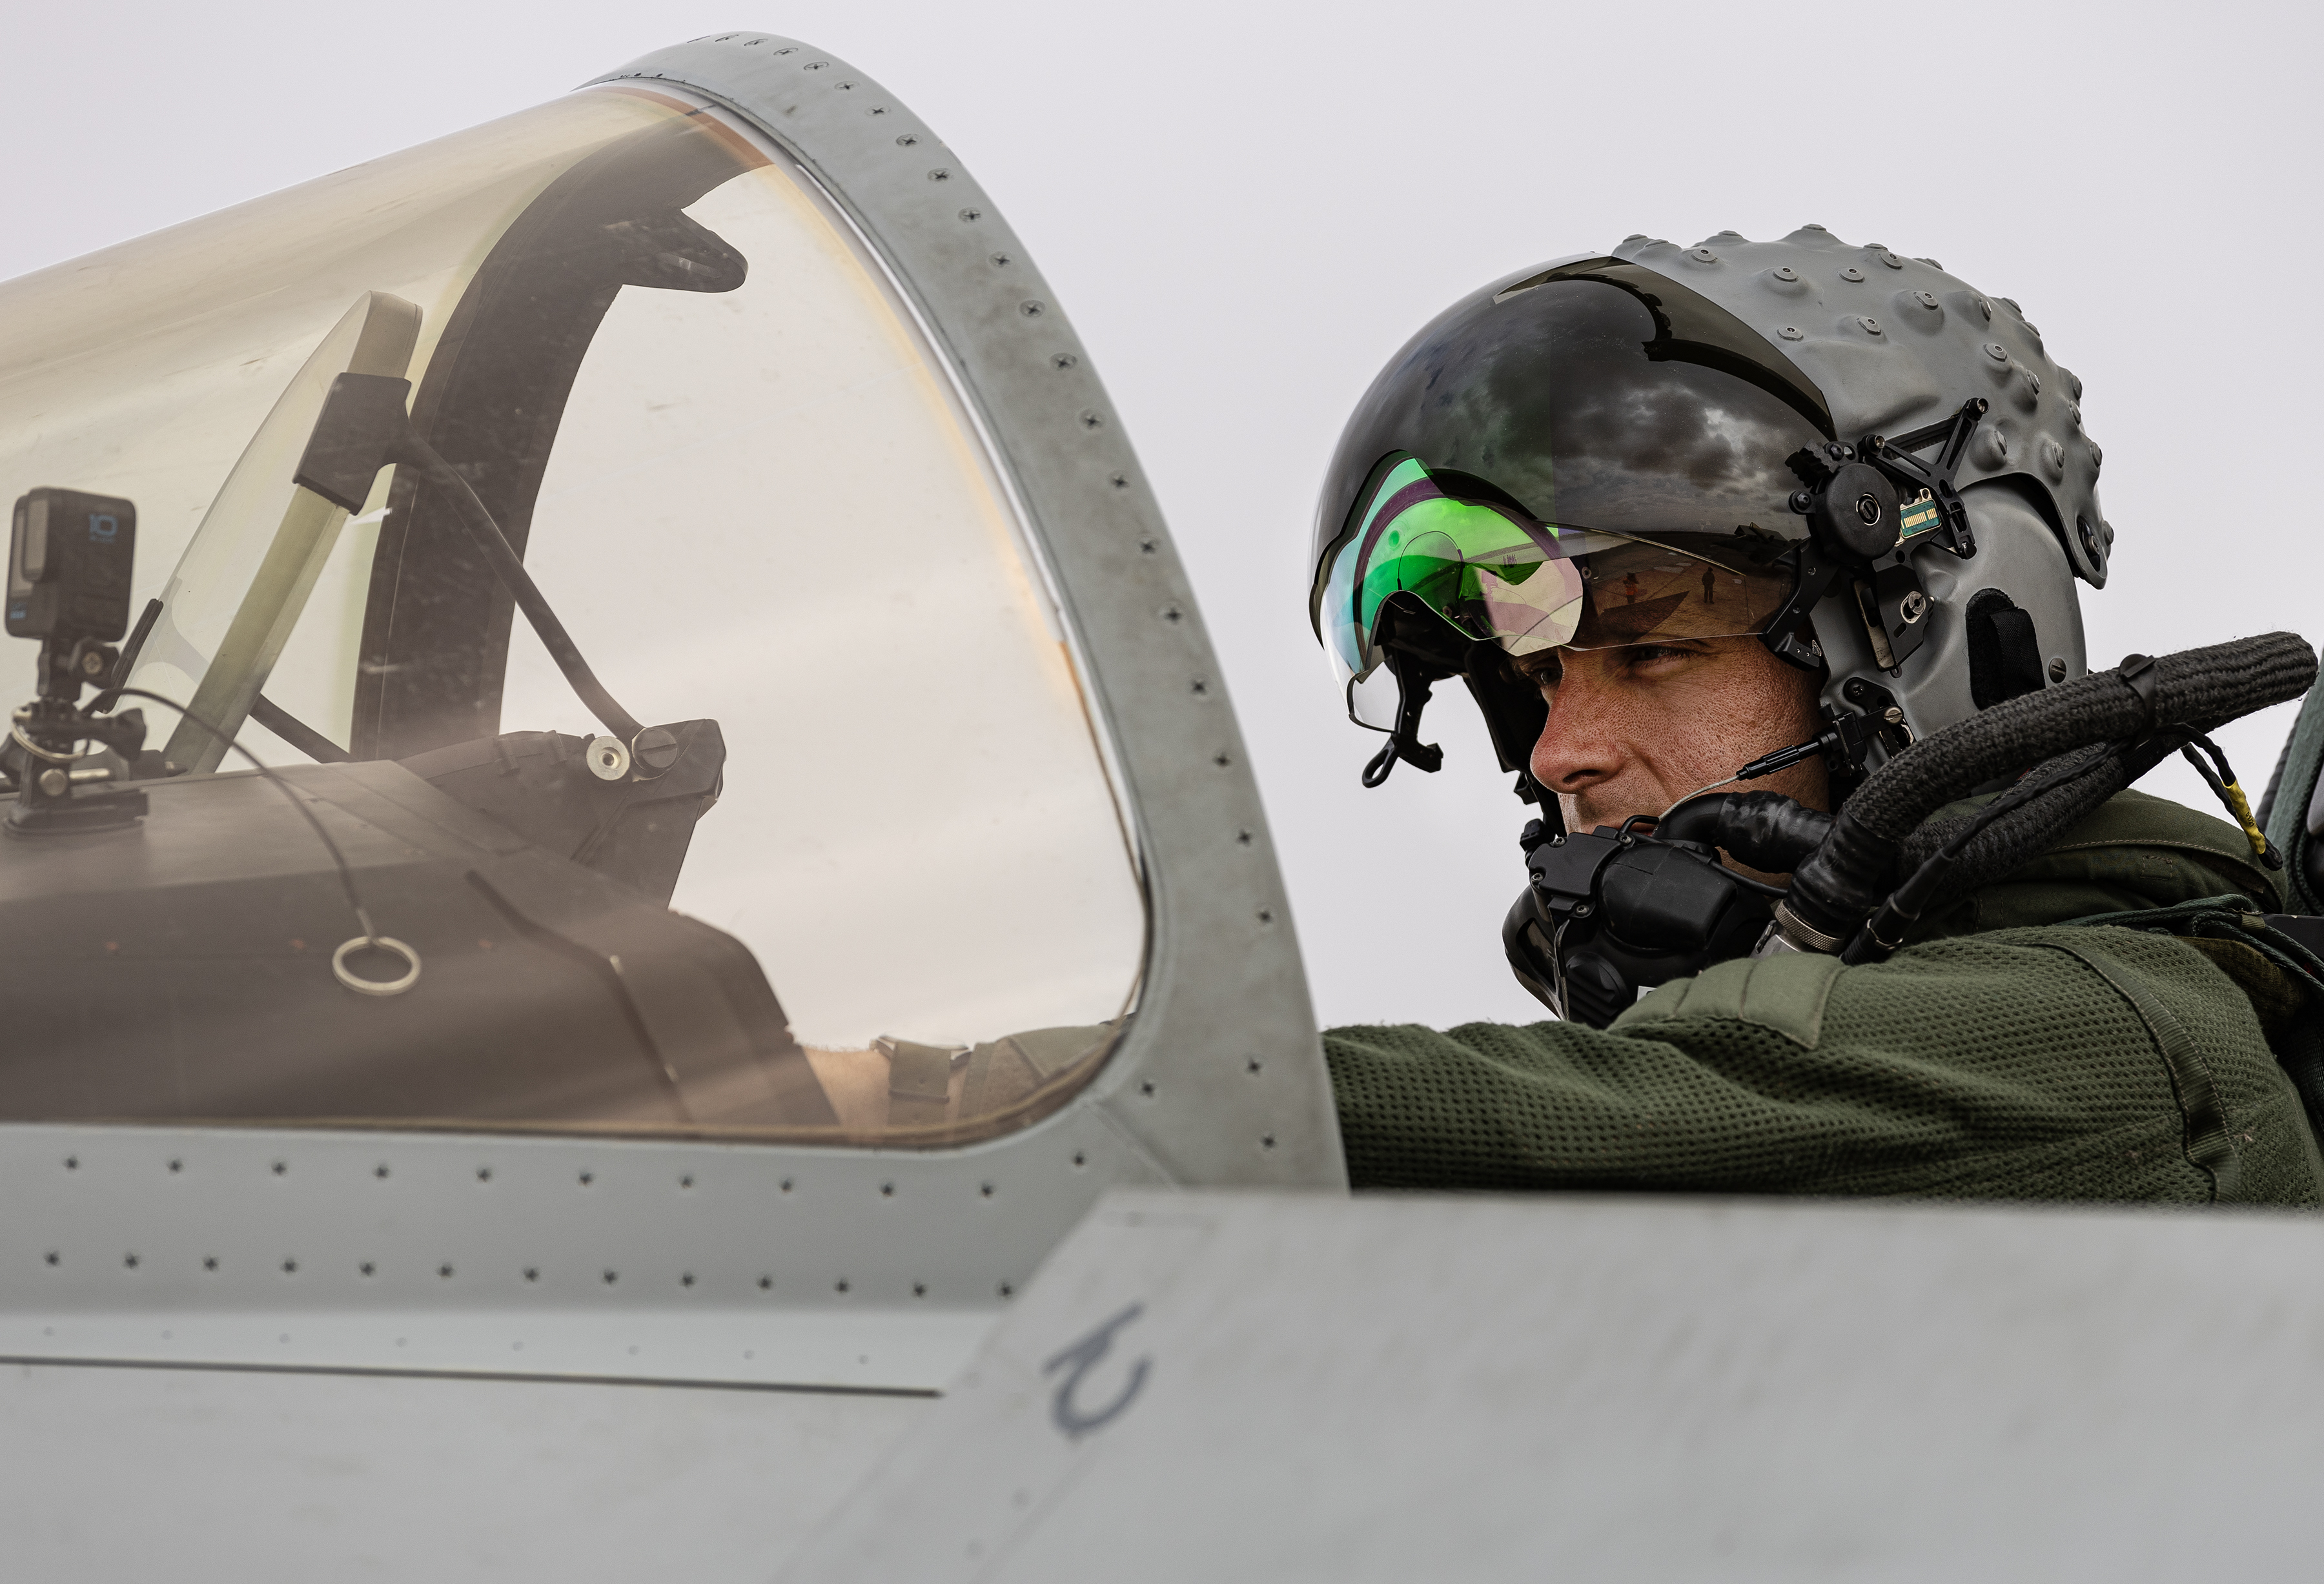 Image shows RAF Typhoon pilot sitting in the cockpit.